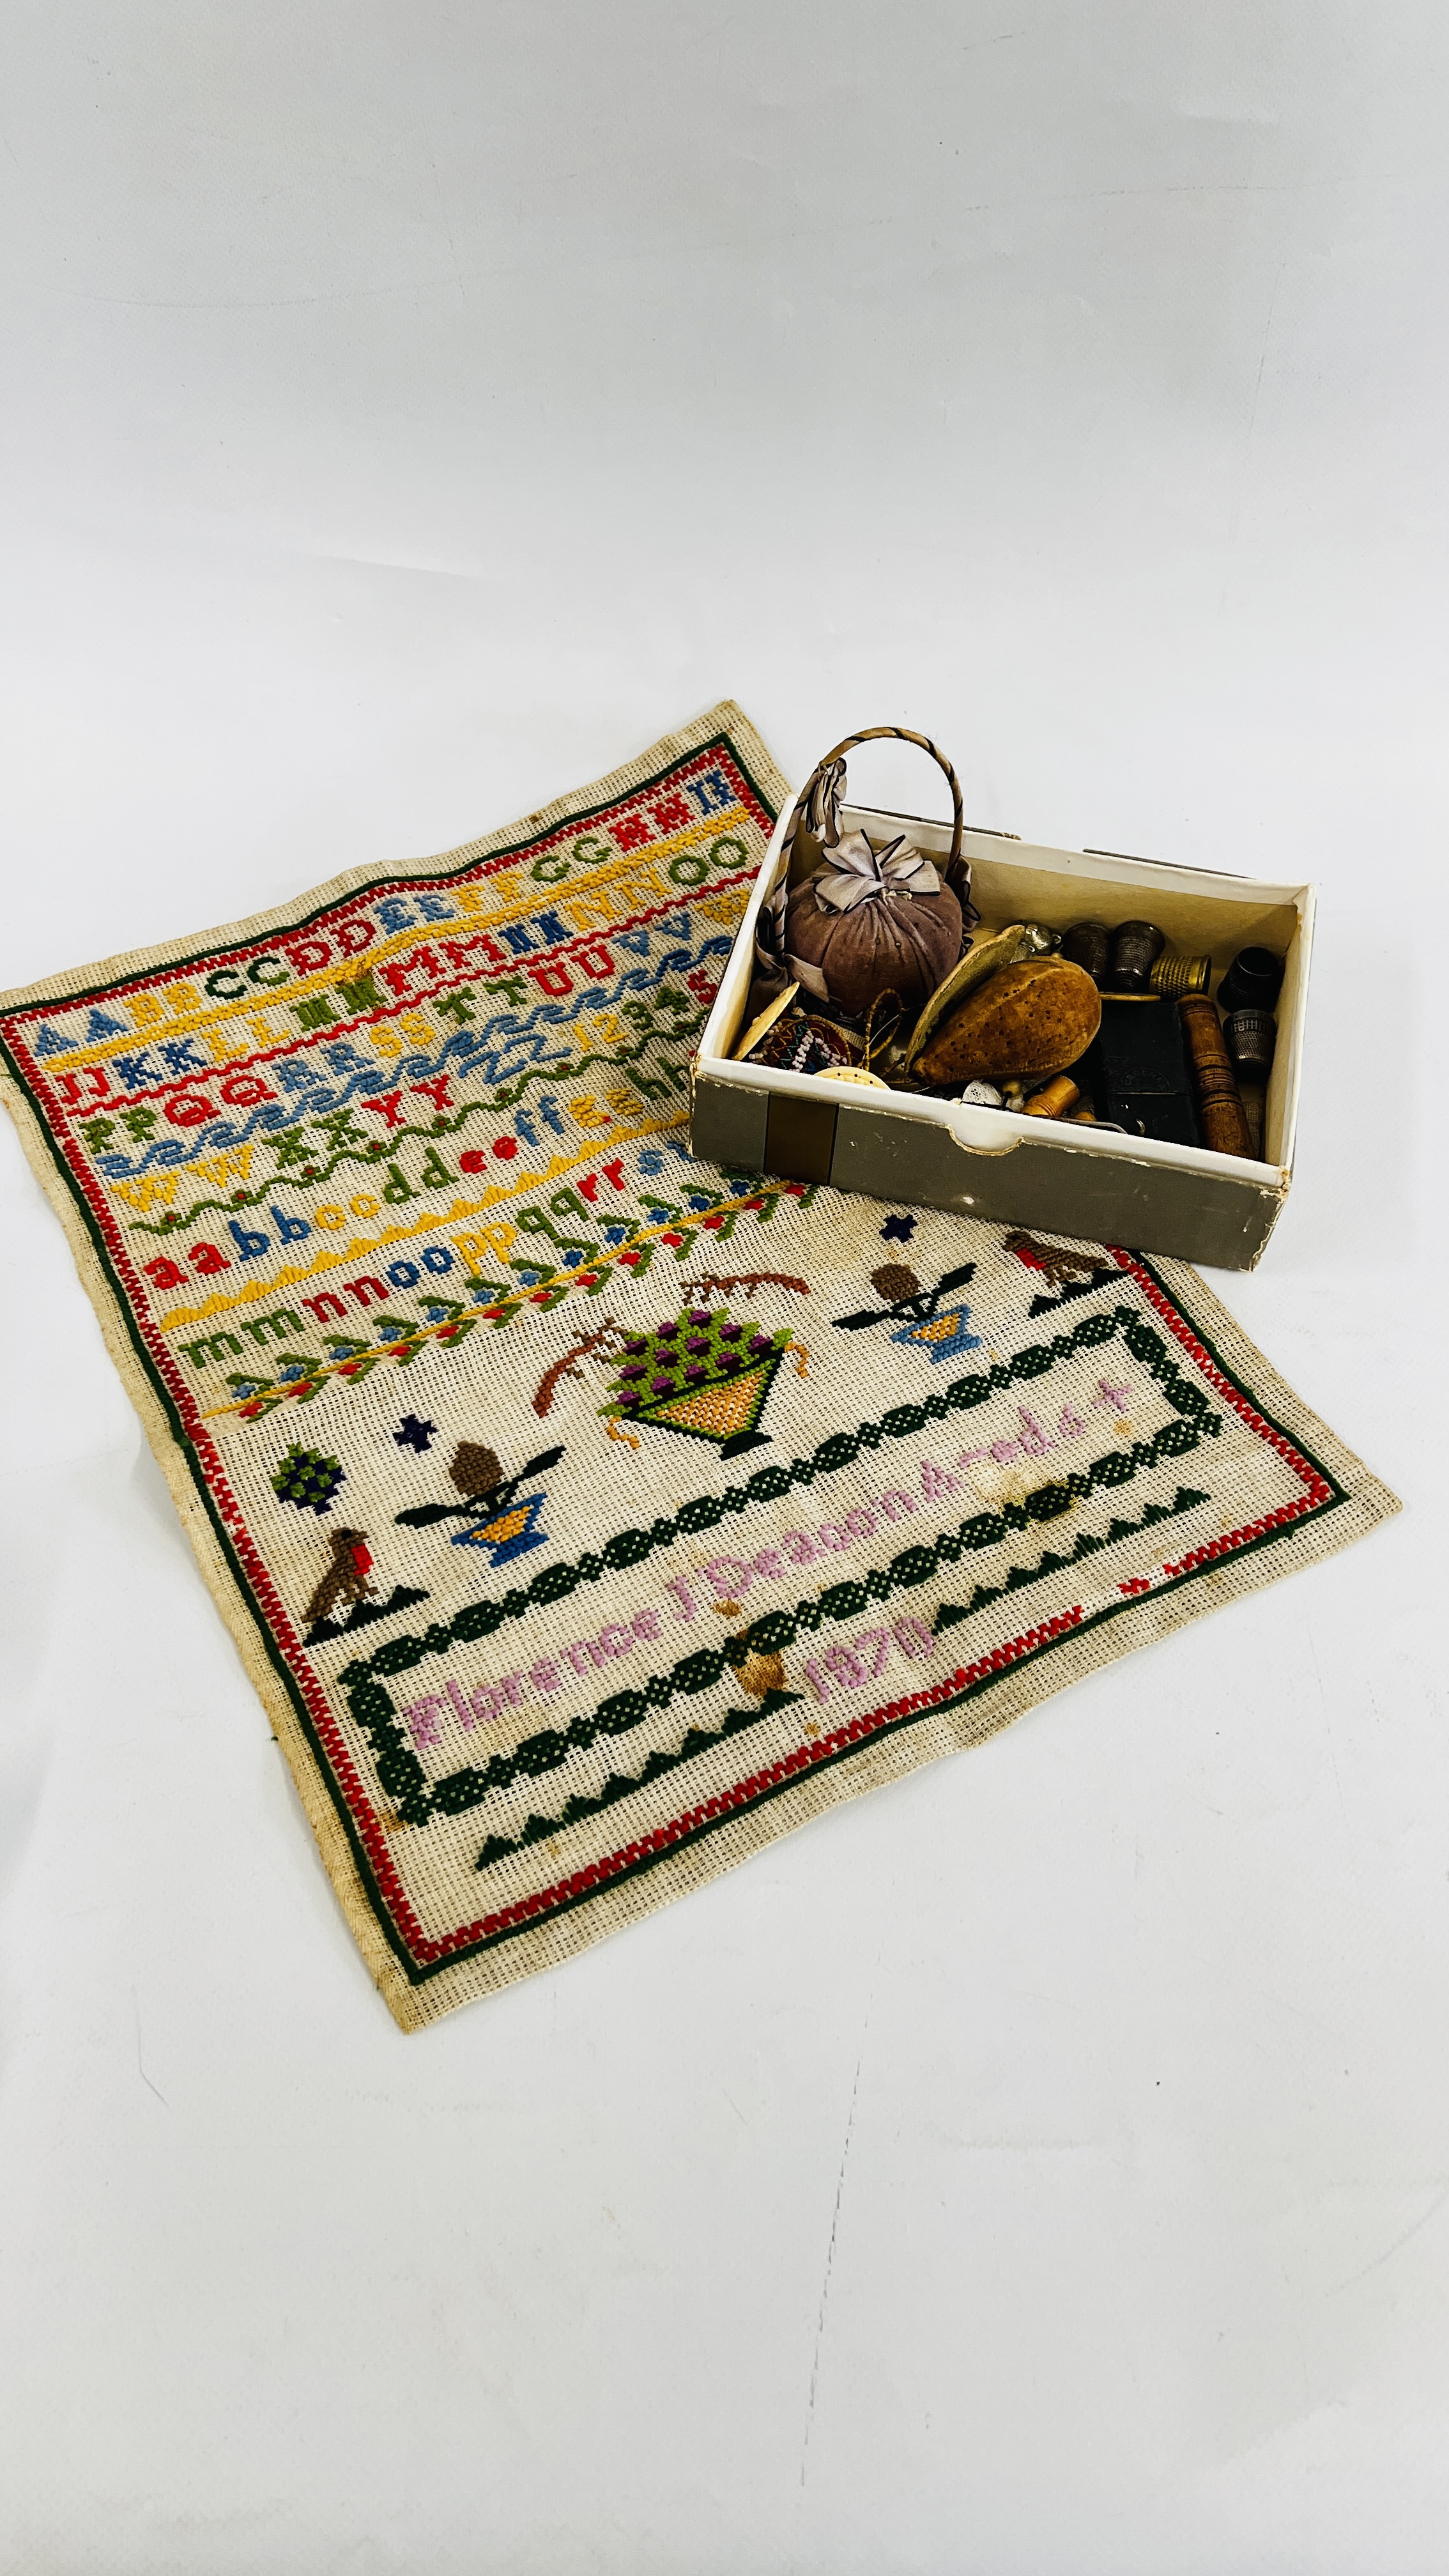 A TRAY CONTAINING VINTAGE SEWING ITEMS TO INCLUDE PIN CUSHIONS, NEEDLE COVERS,